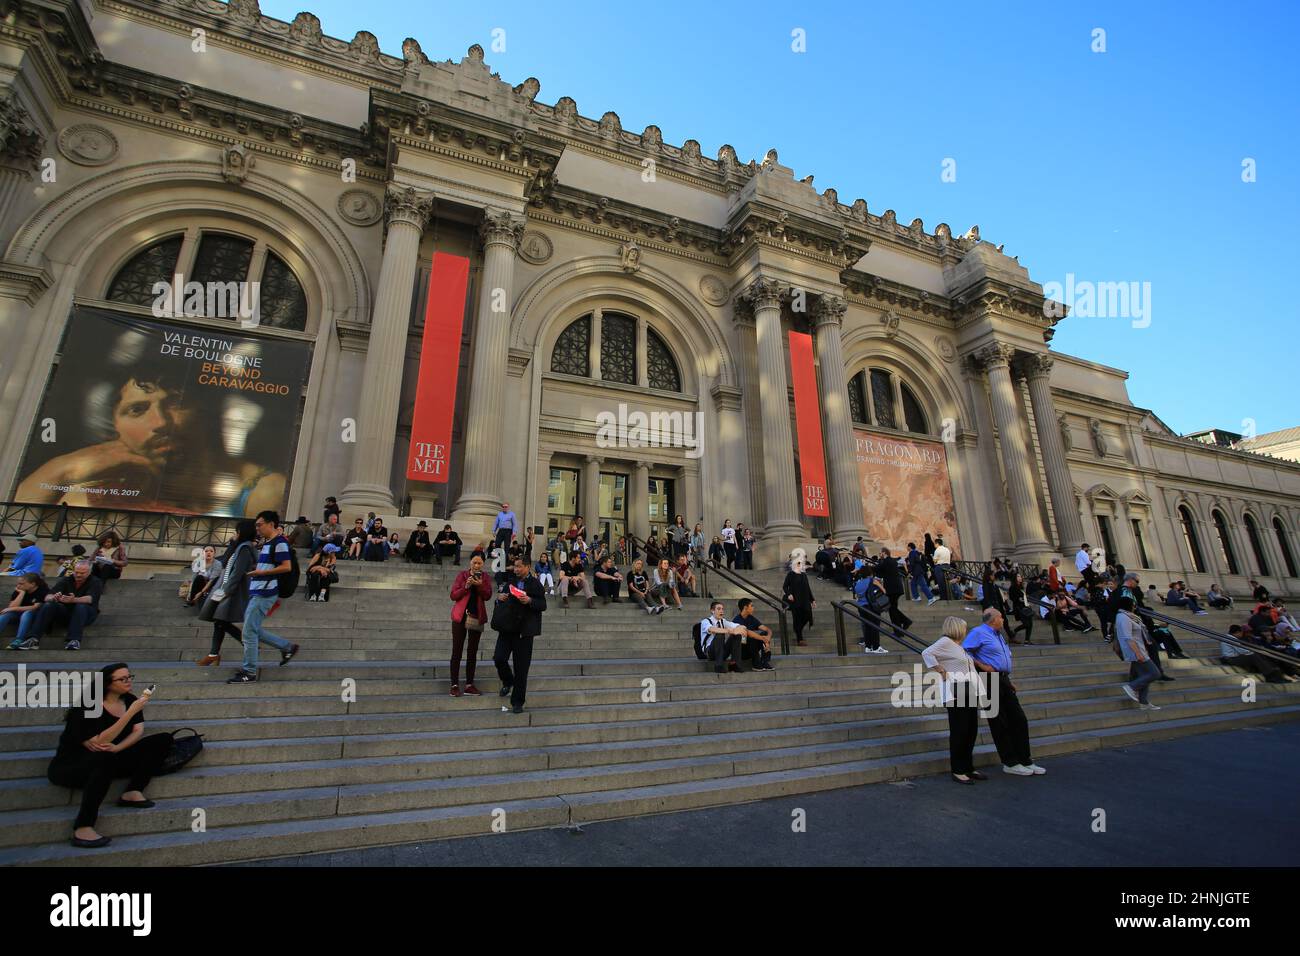 NEW YORK OCT 12: Metropolitan Museum of Art outlook  in New York on 12 October 2016. Metropolitan Museum of Art is one of the biggest museum in the wo Stock Photo